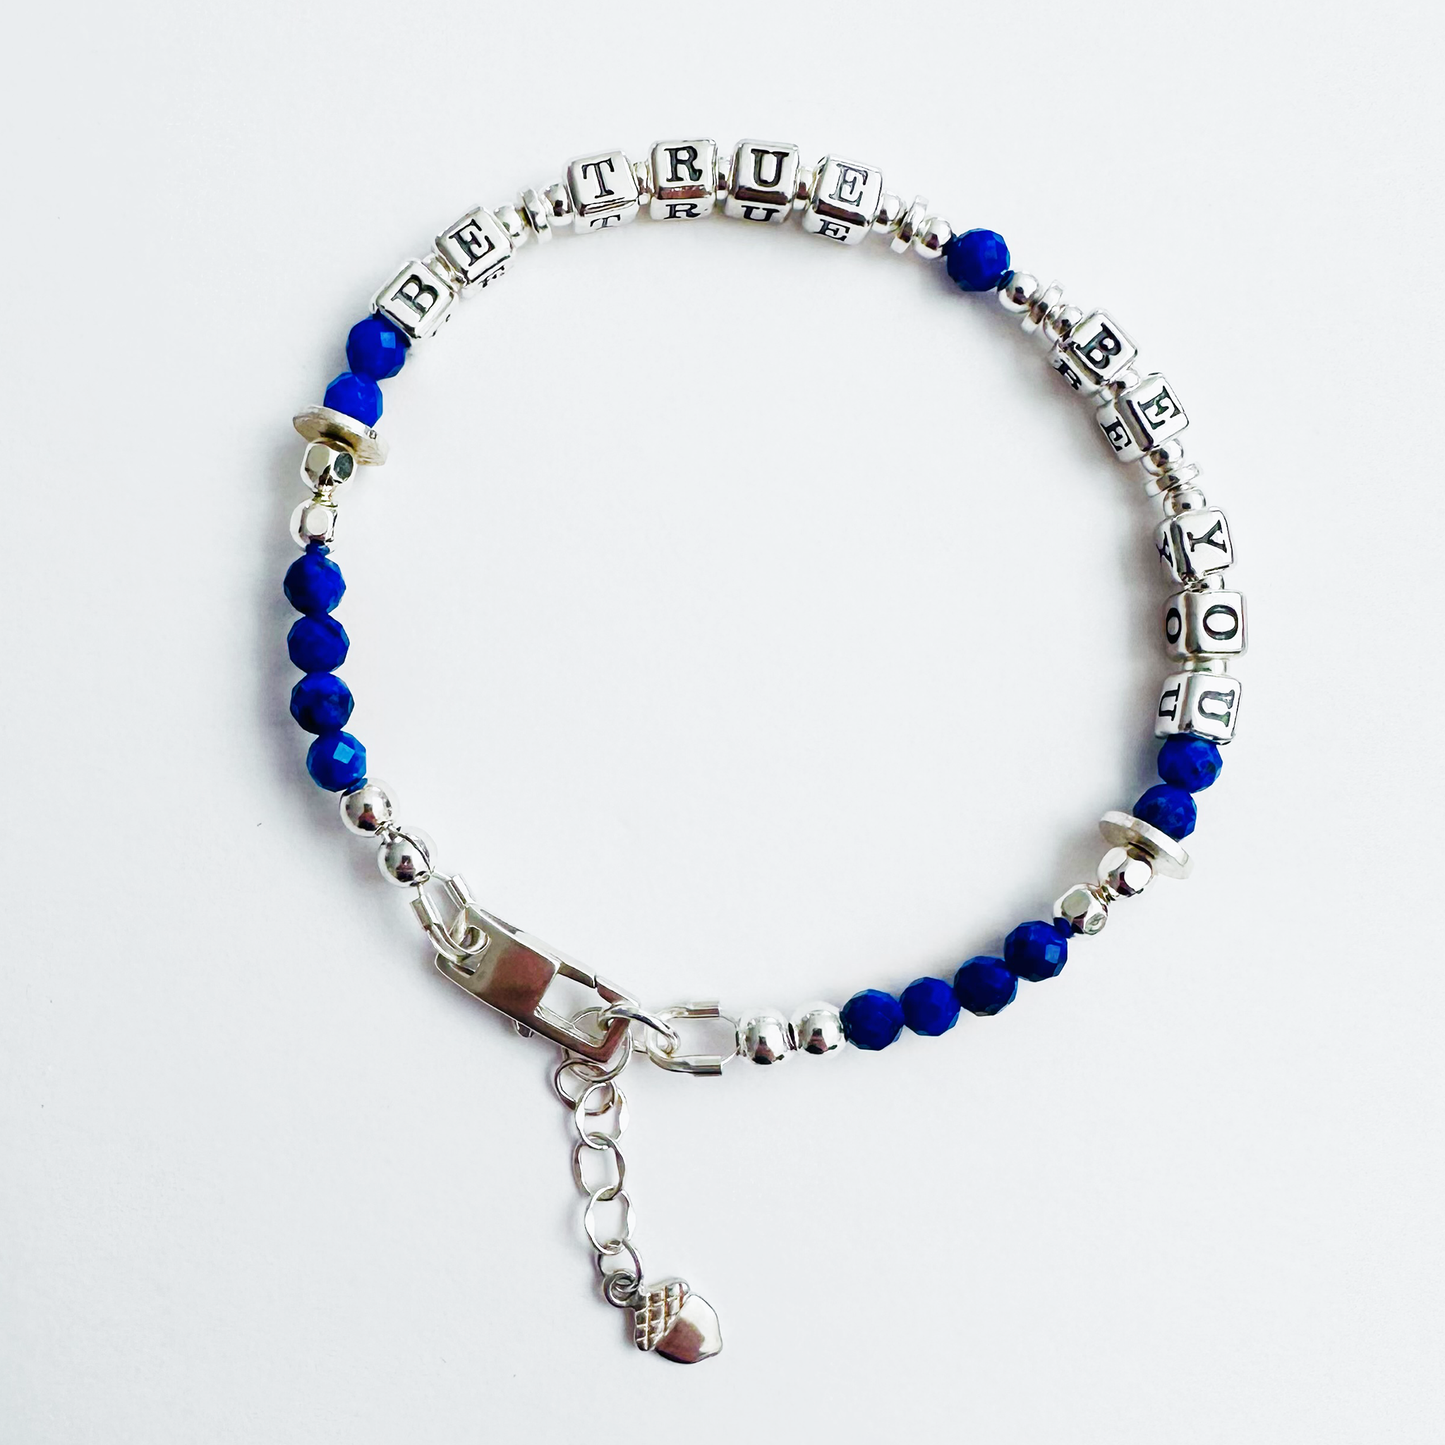 Be True, Be You Sterling Silver Bracelet with blue lapis lazuli gemstones and acorn charm